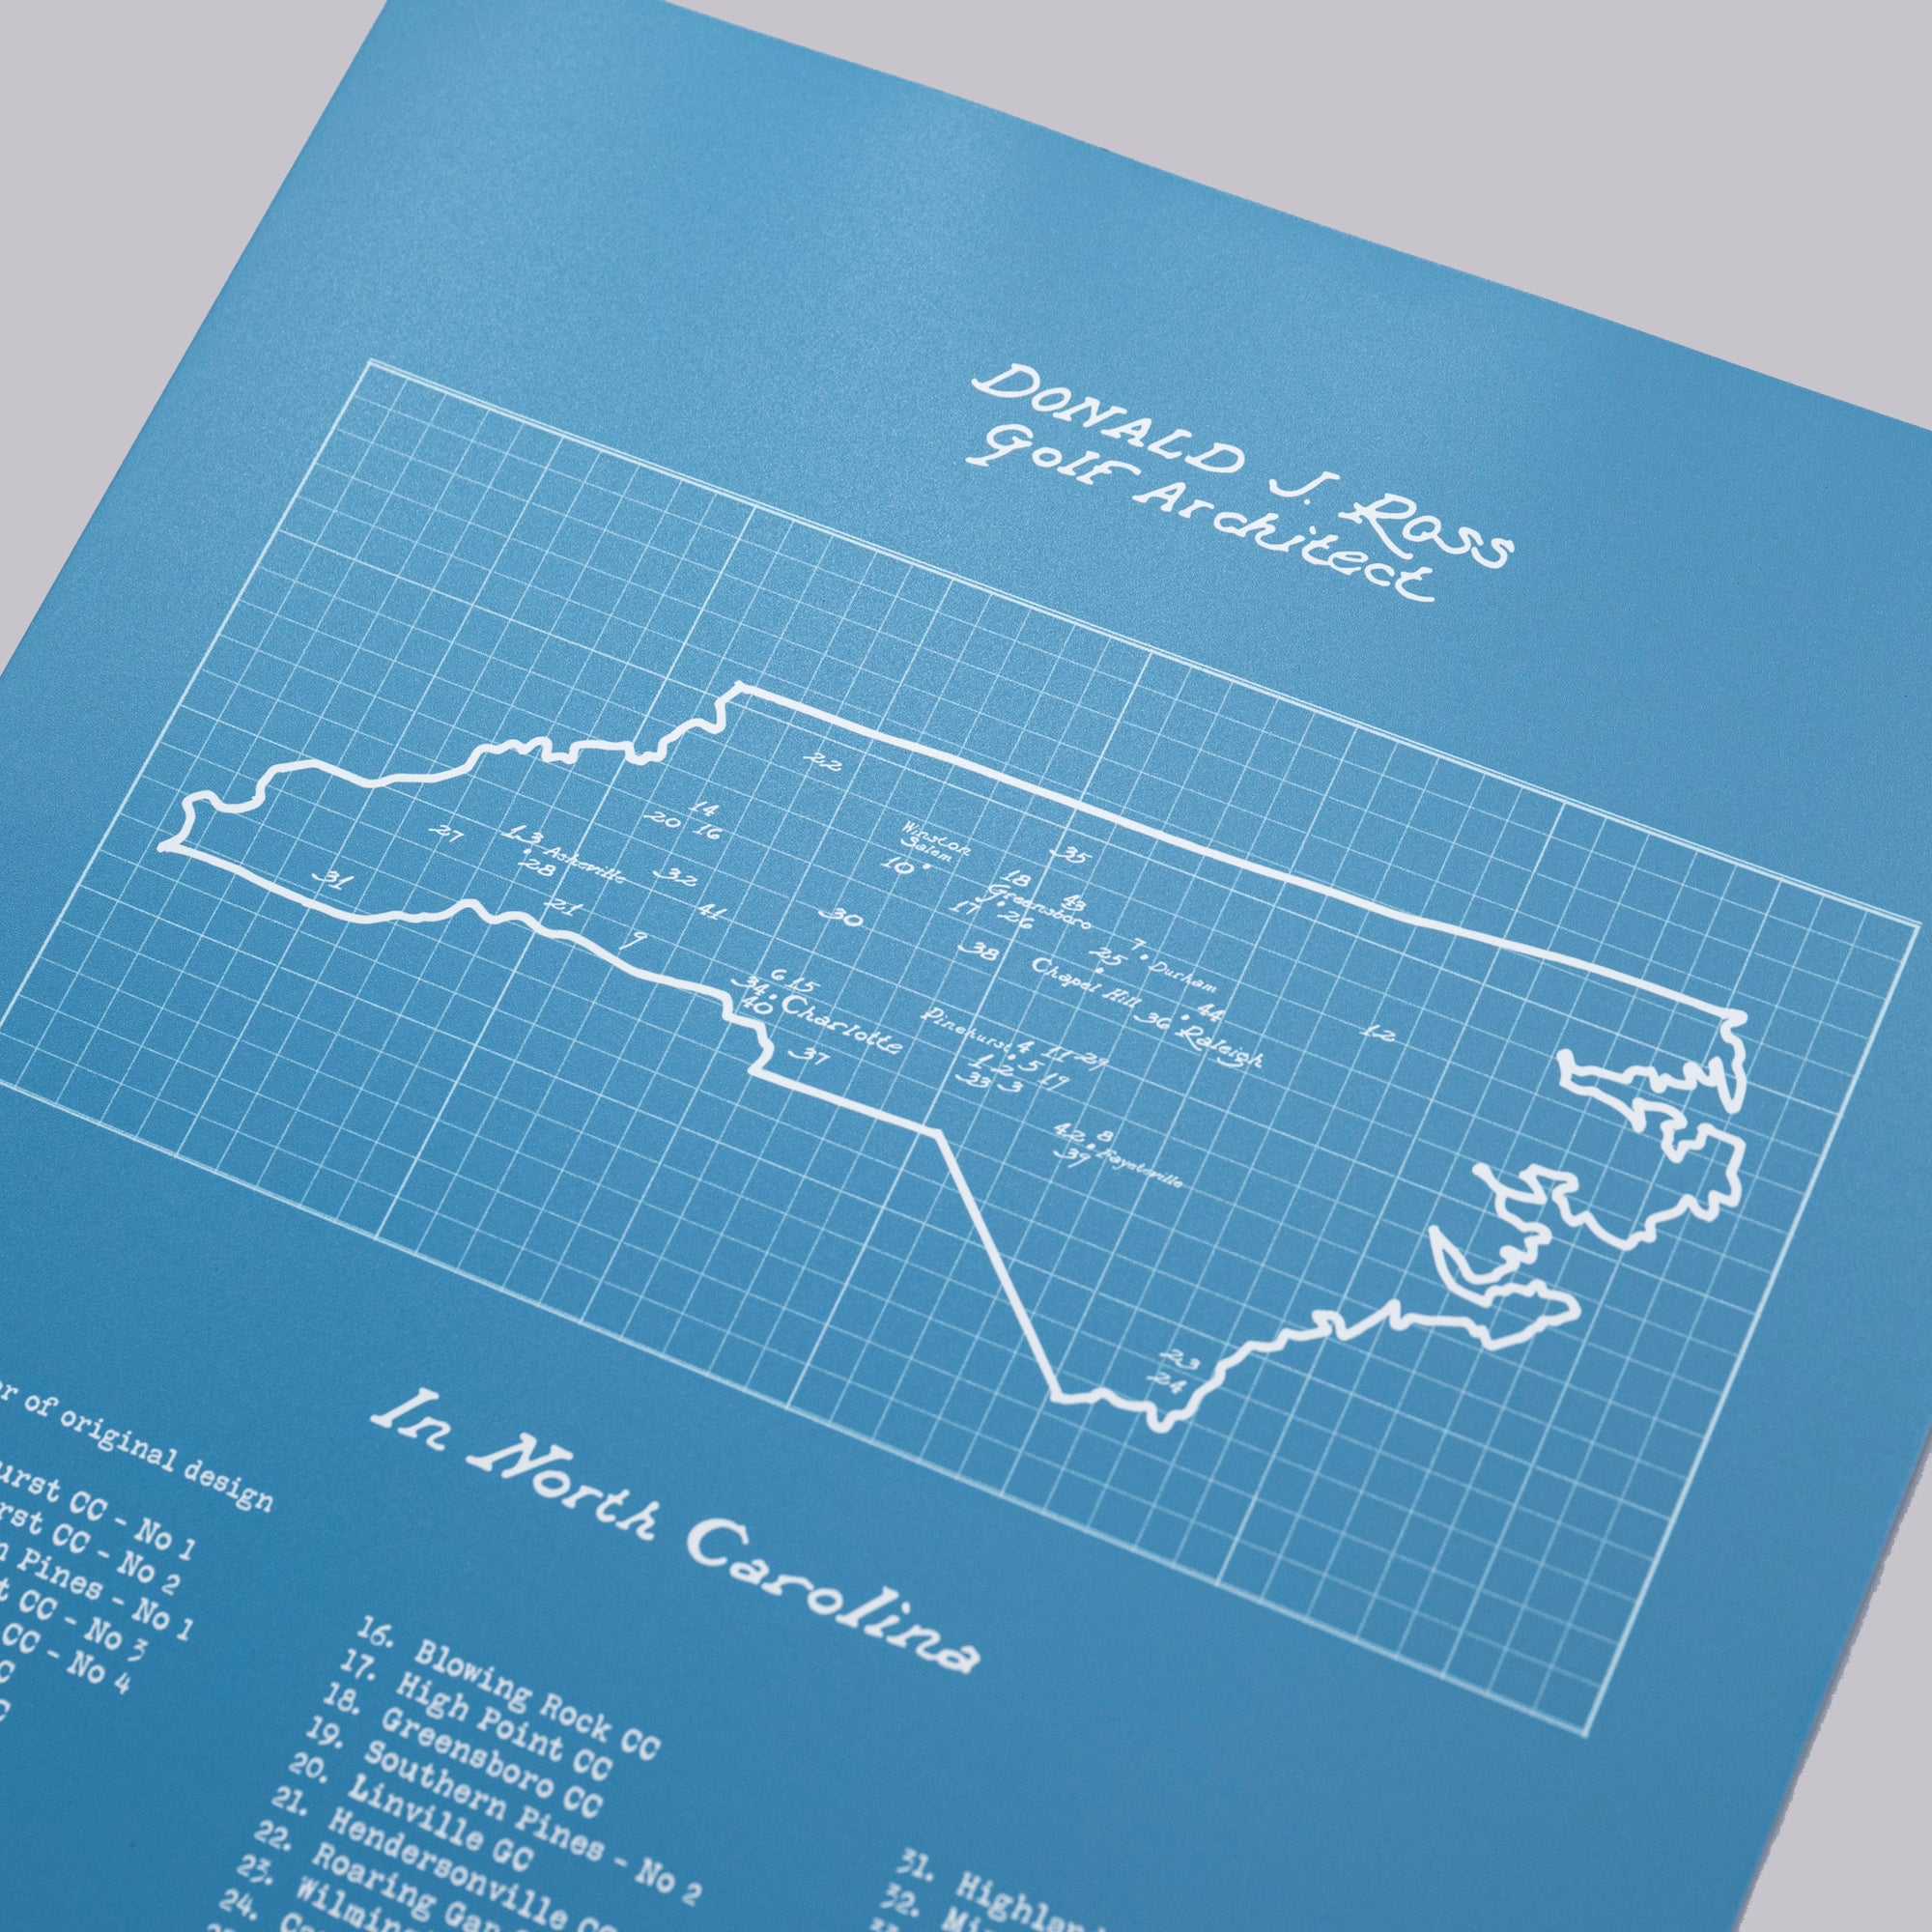 Donald Ross in North Carolina Map Poster